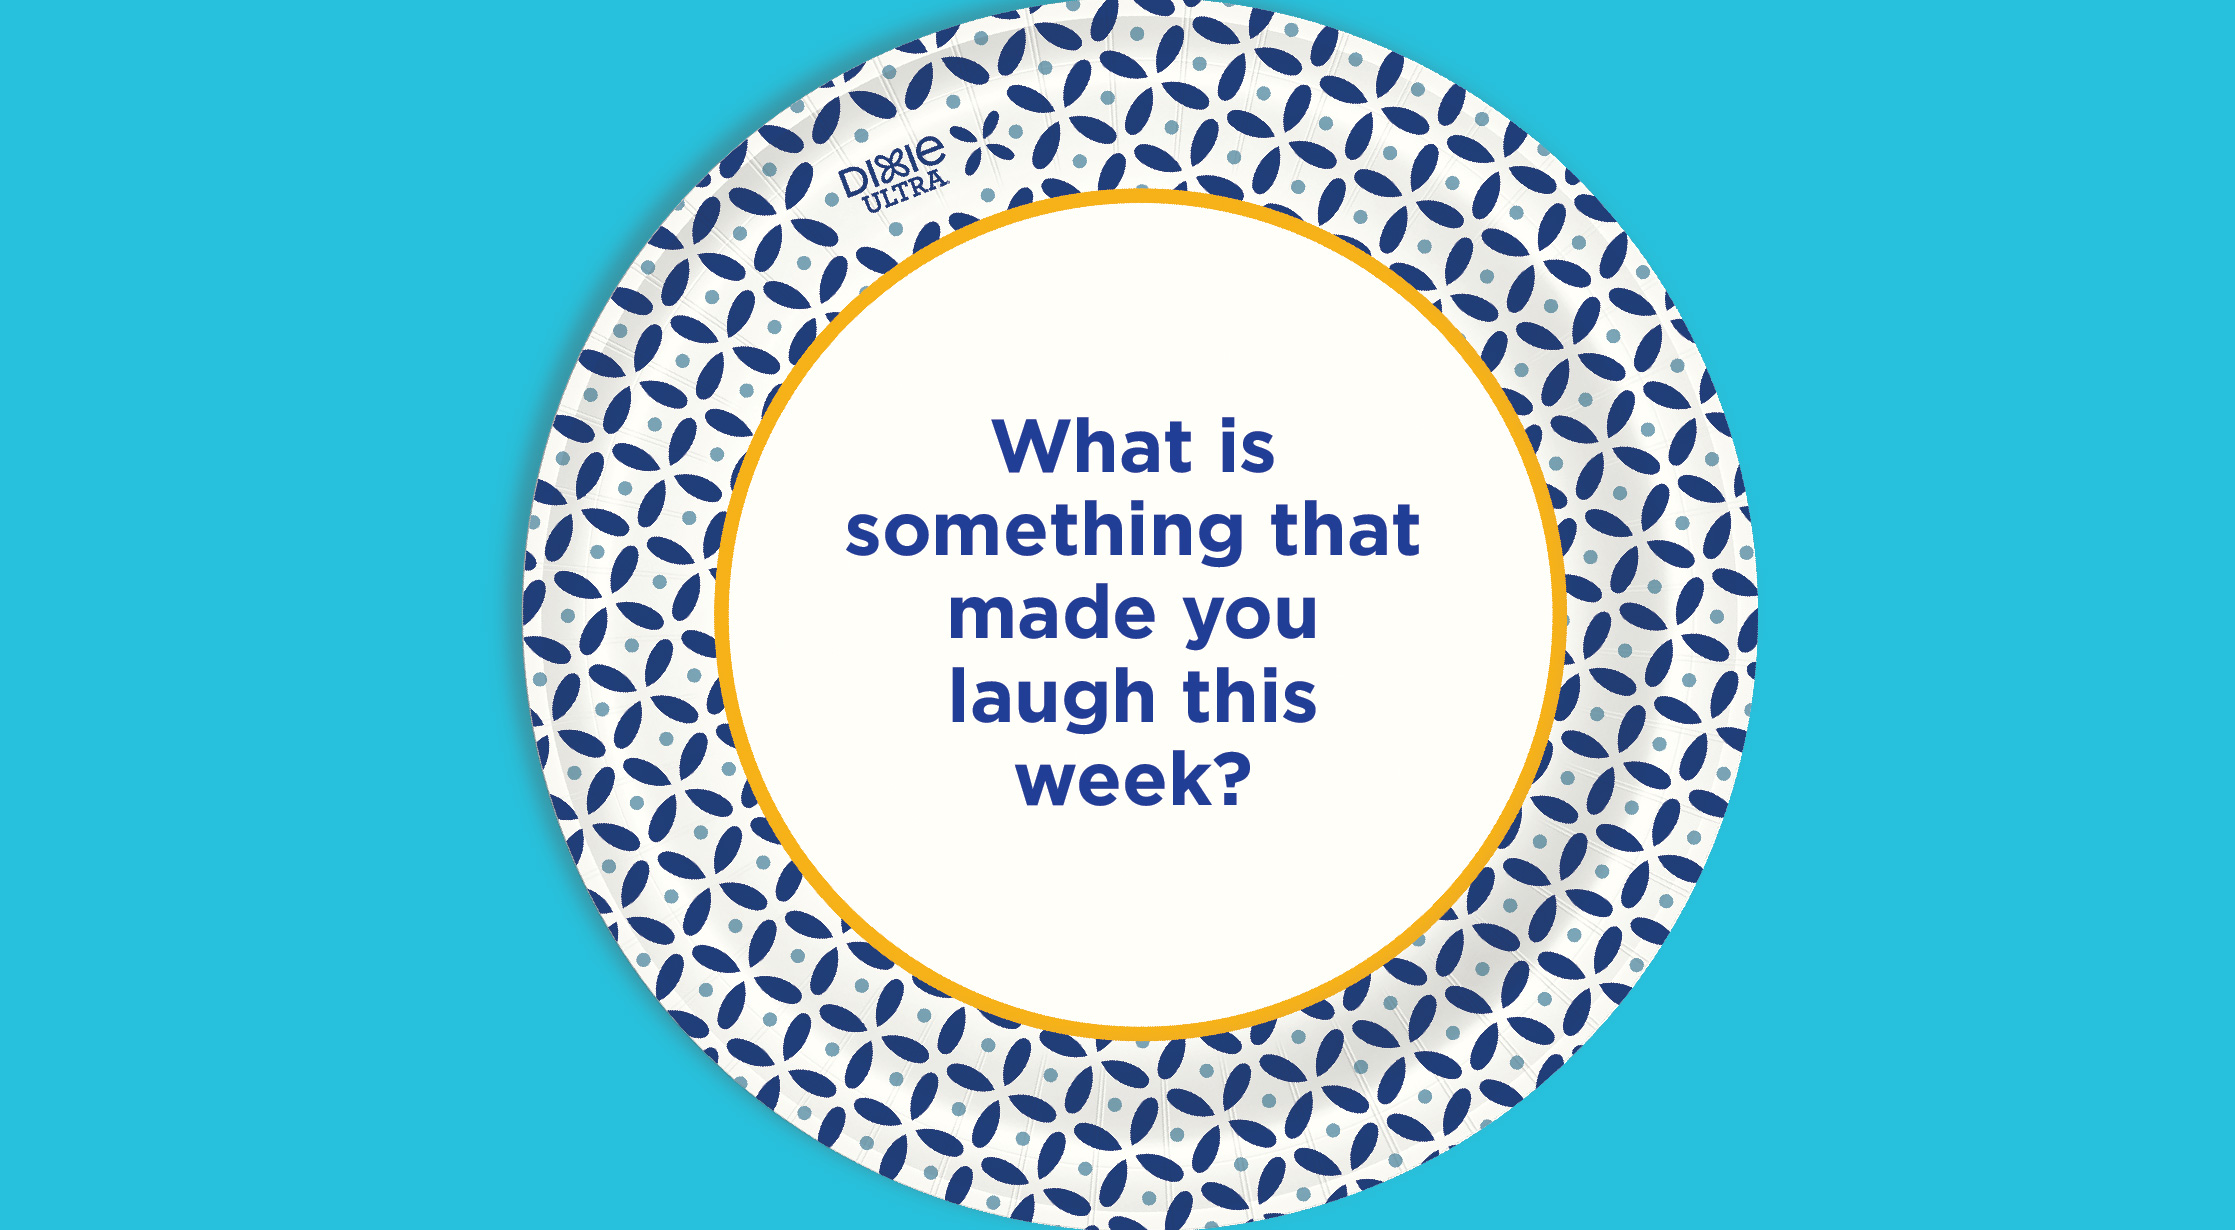 What Is Something That Made You Laugh This Week Written On Dixie Ultra Paper Plate.